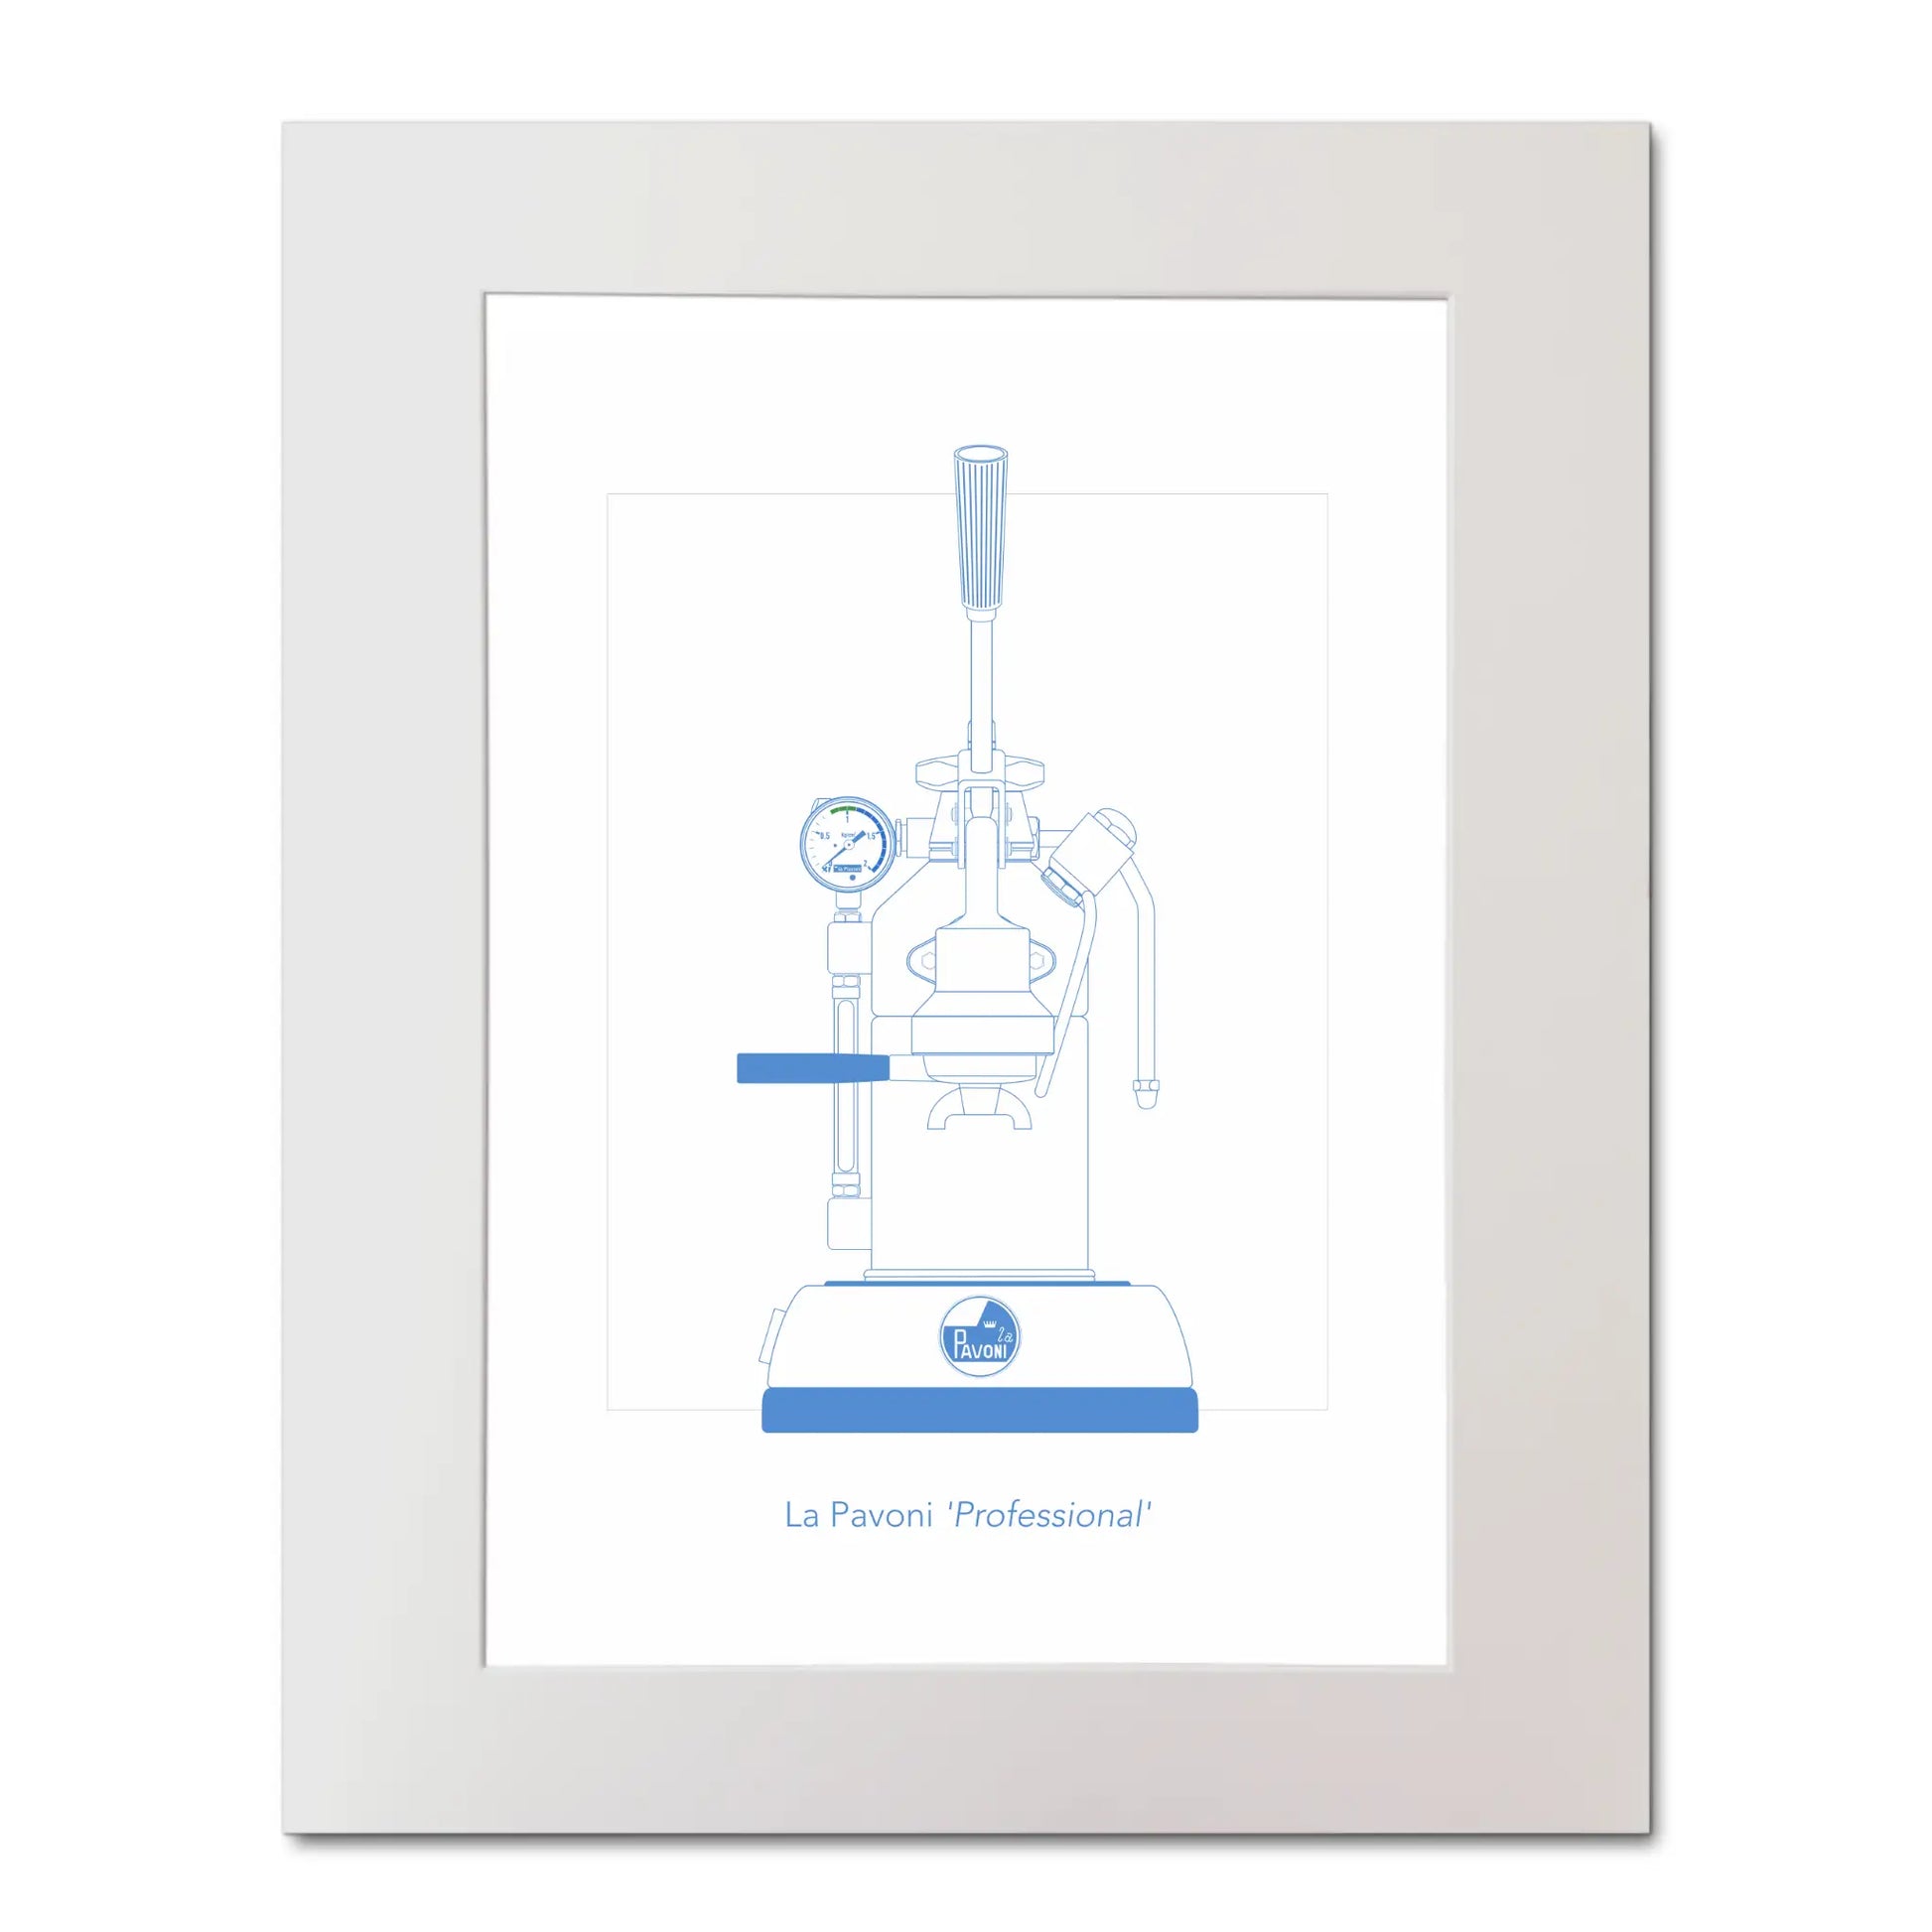 Mounted illustration of a La Pavoni lever coffee machine, front view, line drawing in aqua blue.